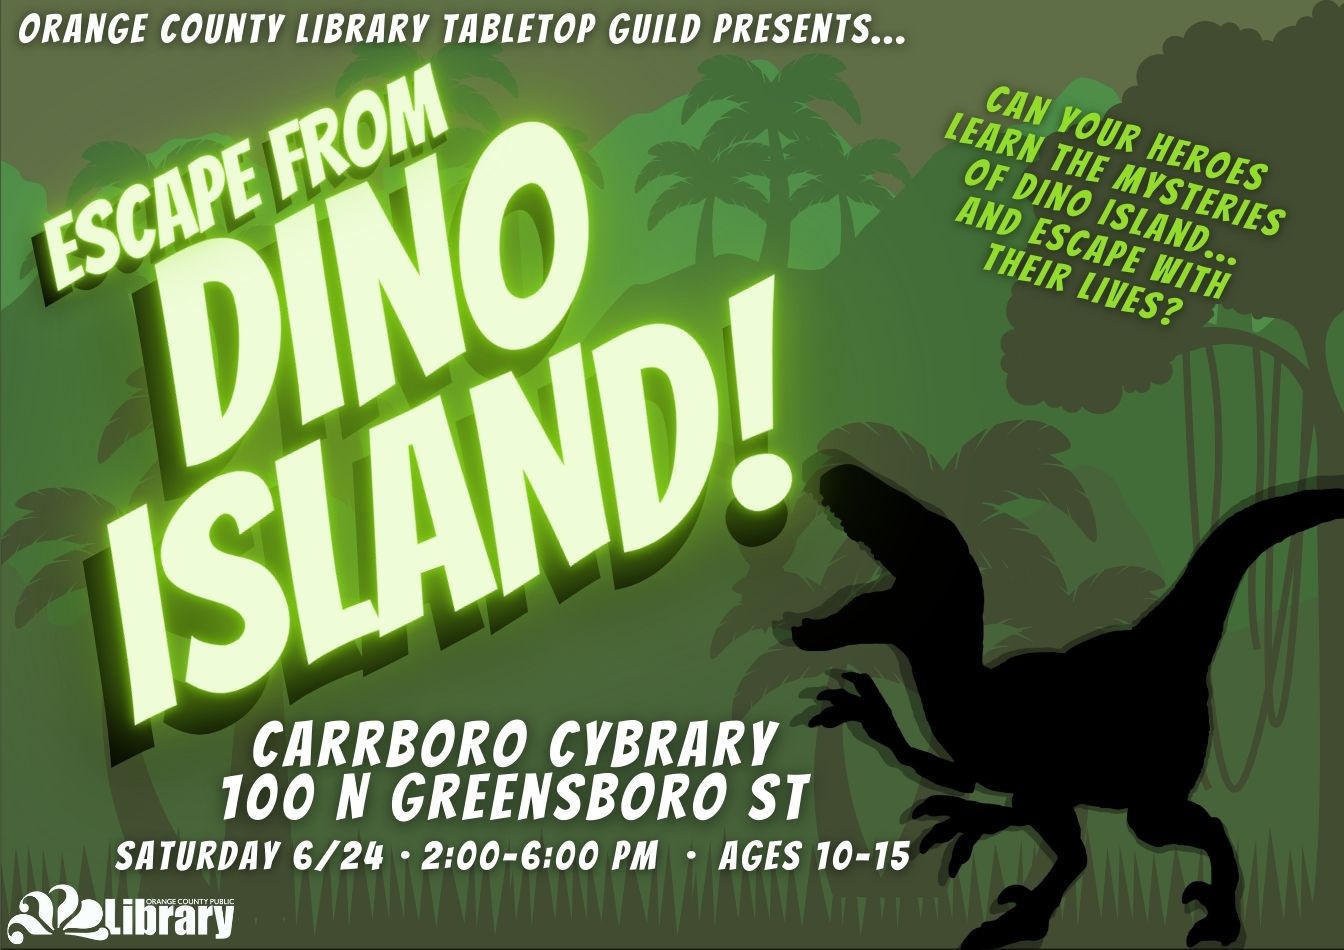 A green flyer with a jungle background advertising the Escape from Dino Island game at the Cybrary. The flyer has a silhouette of a velociraptor roaring. Flyer text: Orange County Library Tabletop Guild presents Escape from Dino Island! Can your heroes learn the mysteries of Dino Island and escape with their lives? Carrboro Cybrary, 100 North Greensboro Street, Carrboro, NC. Saturday, June 24, 2:00 to 6:00 pm, ages 10 to 15.